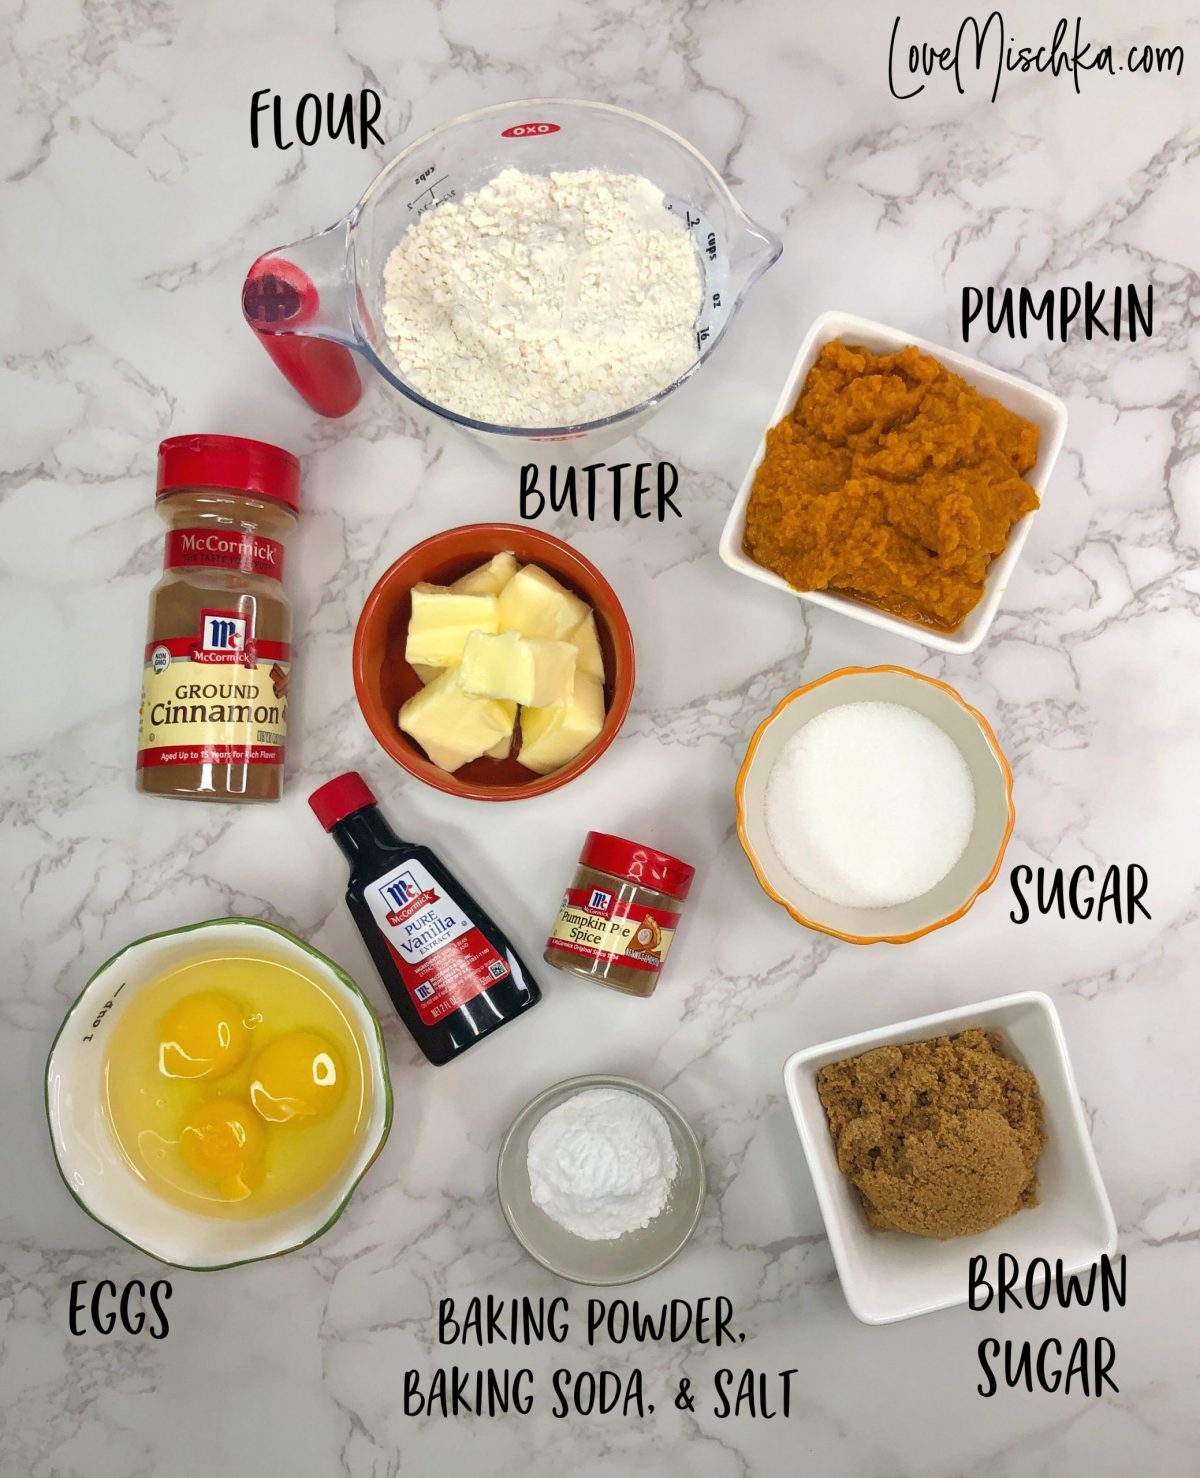 Ingredients for Pumpkin Cake laid out on a marble table.